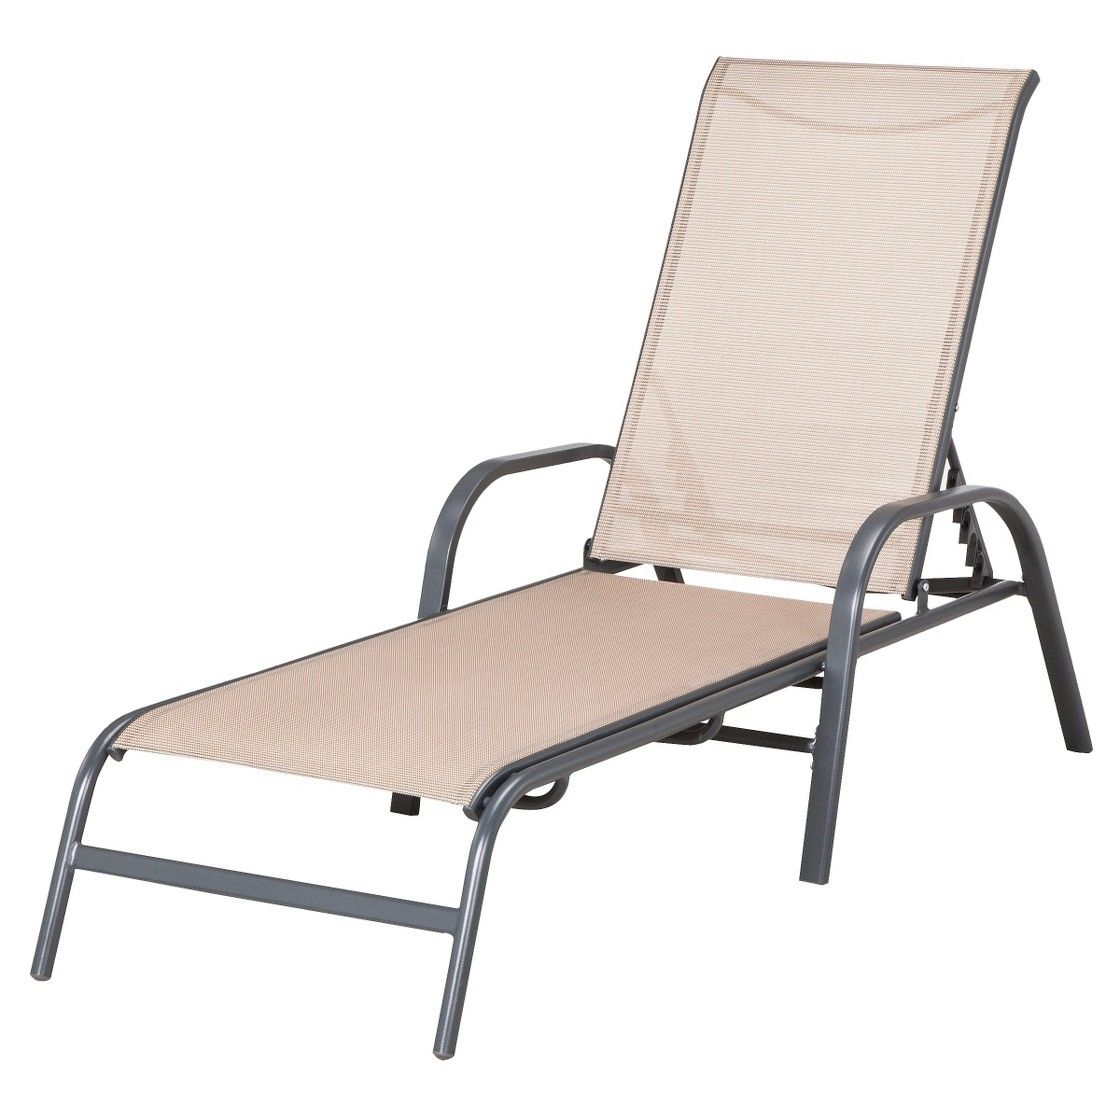 Room Essentials Nicollet Sling Patio Chaise Lounge Tan regarding proportions 1120 X 1120